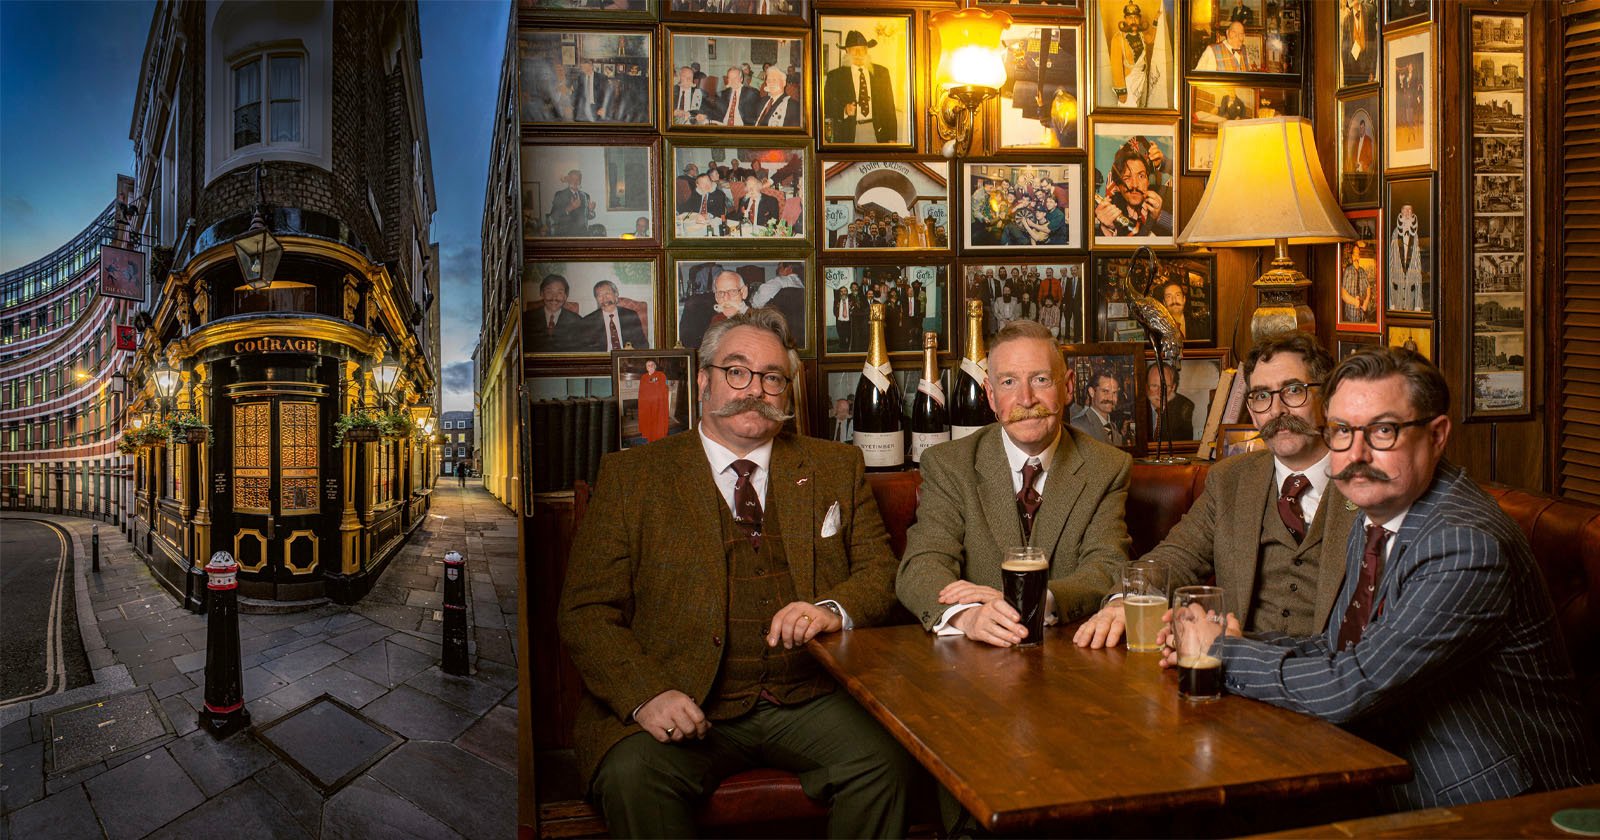 A group of four men with mustaches, wearing formal attire, are gathered at a wooden table in a cozy, dimly lit pub. Behind them are framed photographs covering the wall. The exterior of the pub, located on a curving street, is shown on the left side.